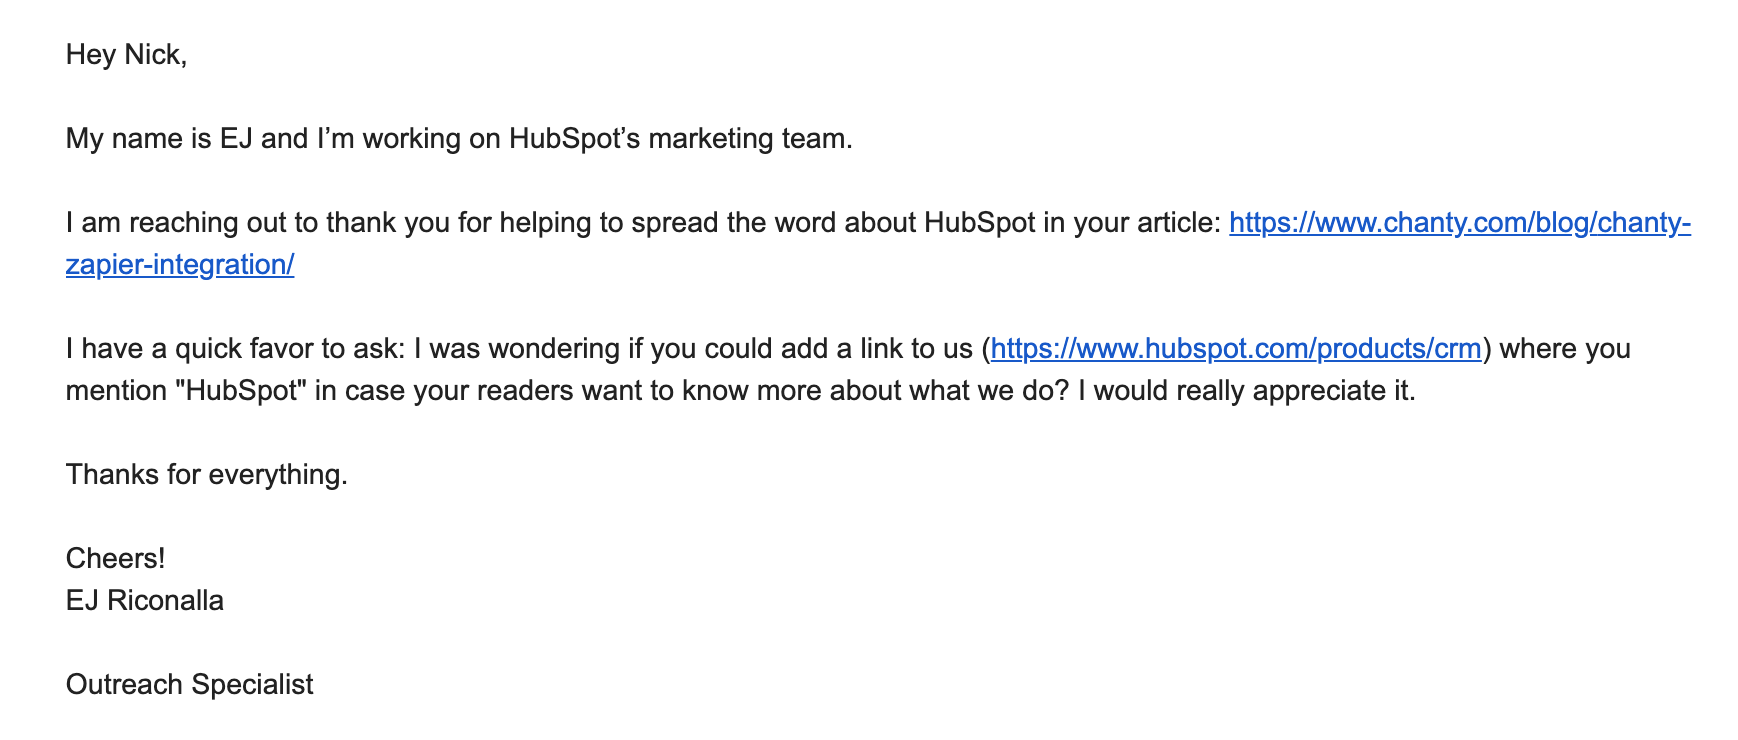 HubSpot email asking for a backlink from our website